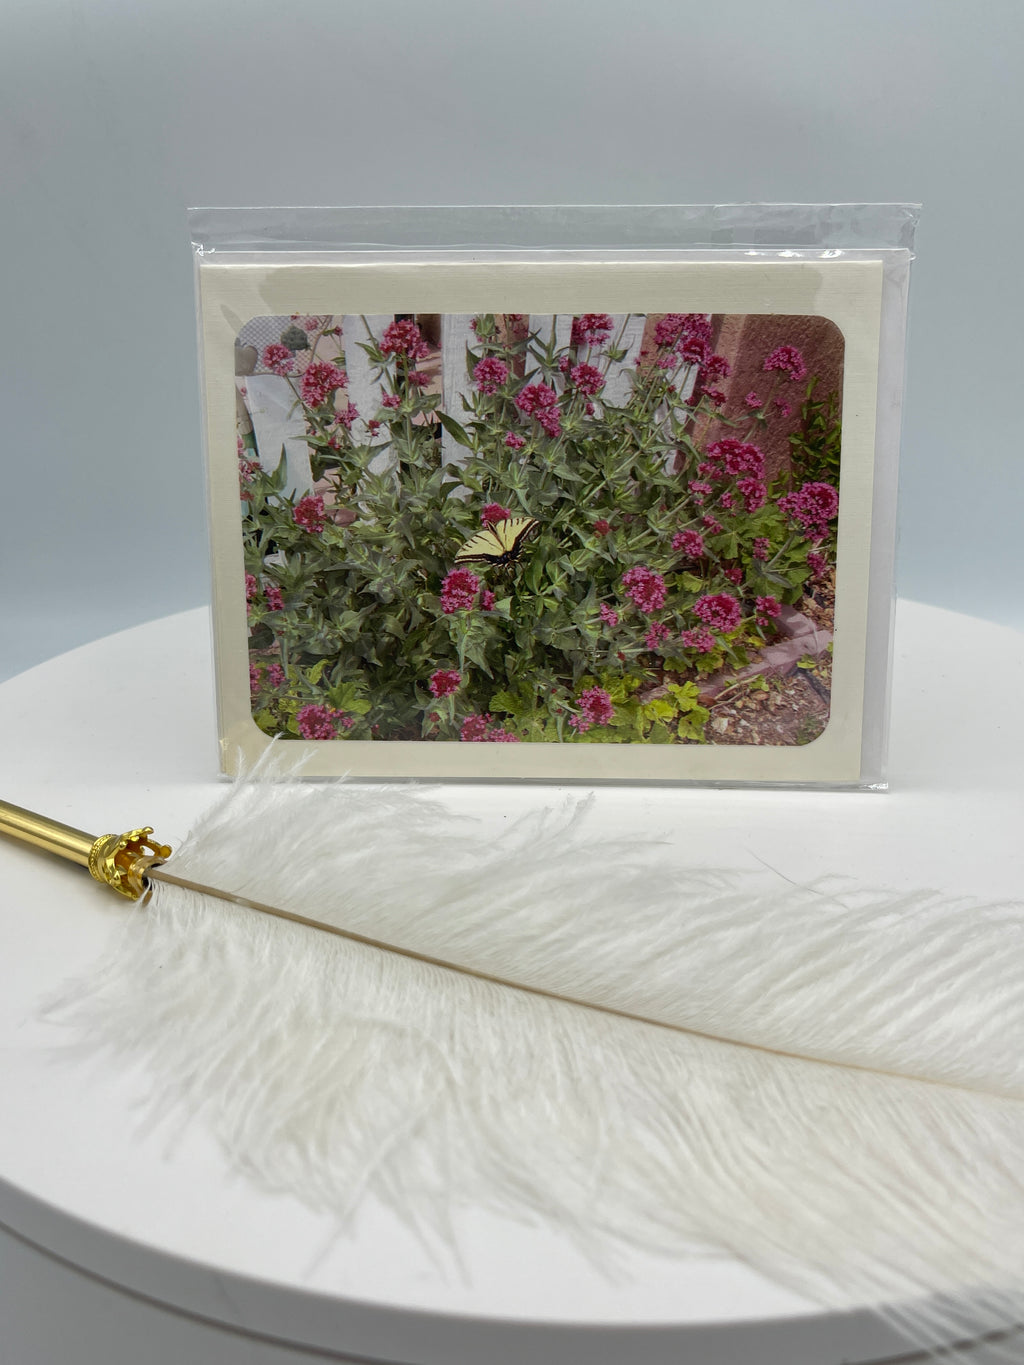 Yellow Swallowtail & Red Valerian on White Pickett Fence Photo Card